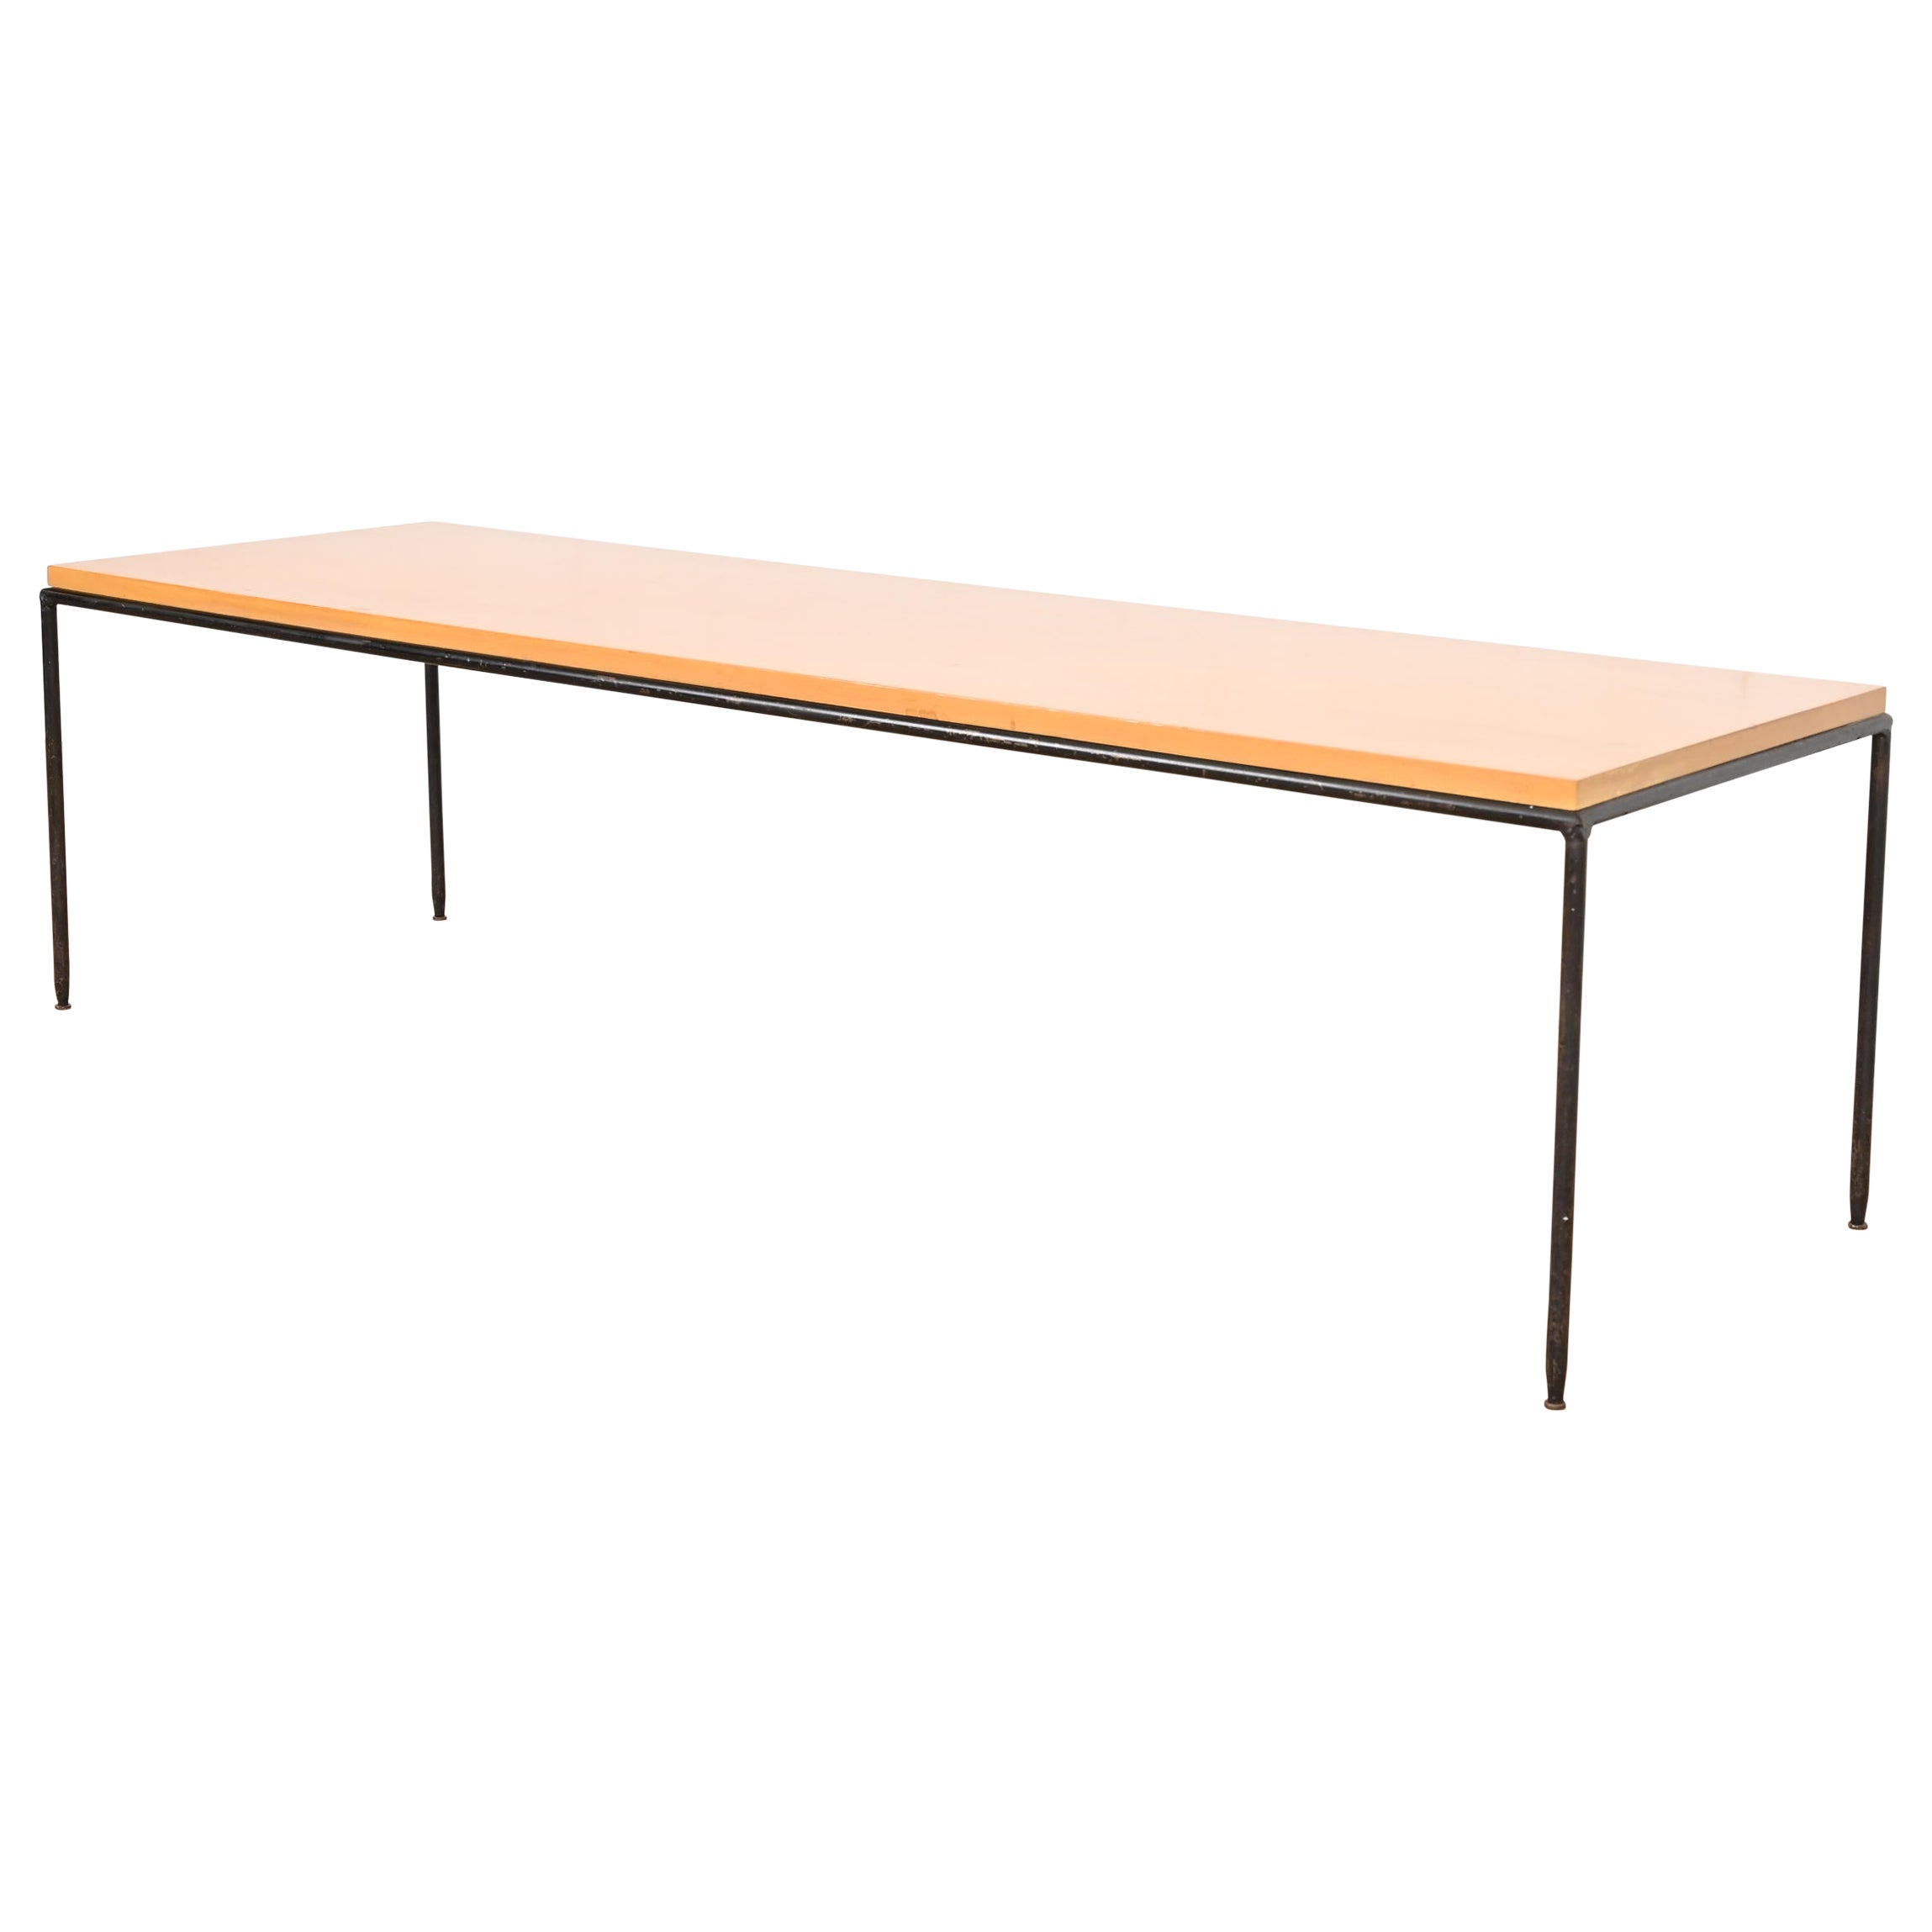 Paul McCobb Planner Group Birch and Iron Coffee Table or Bench, 1950s